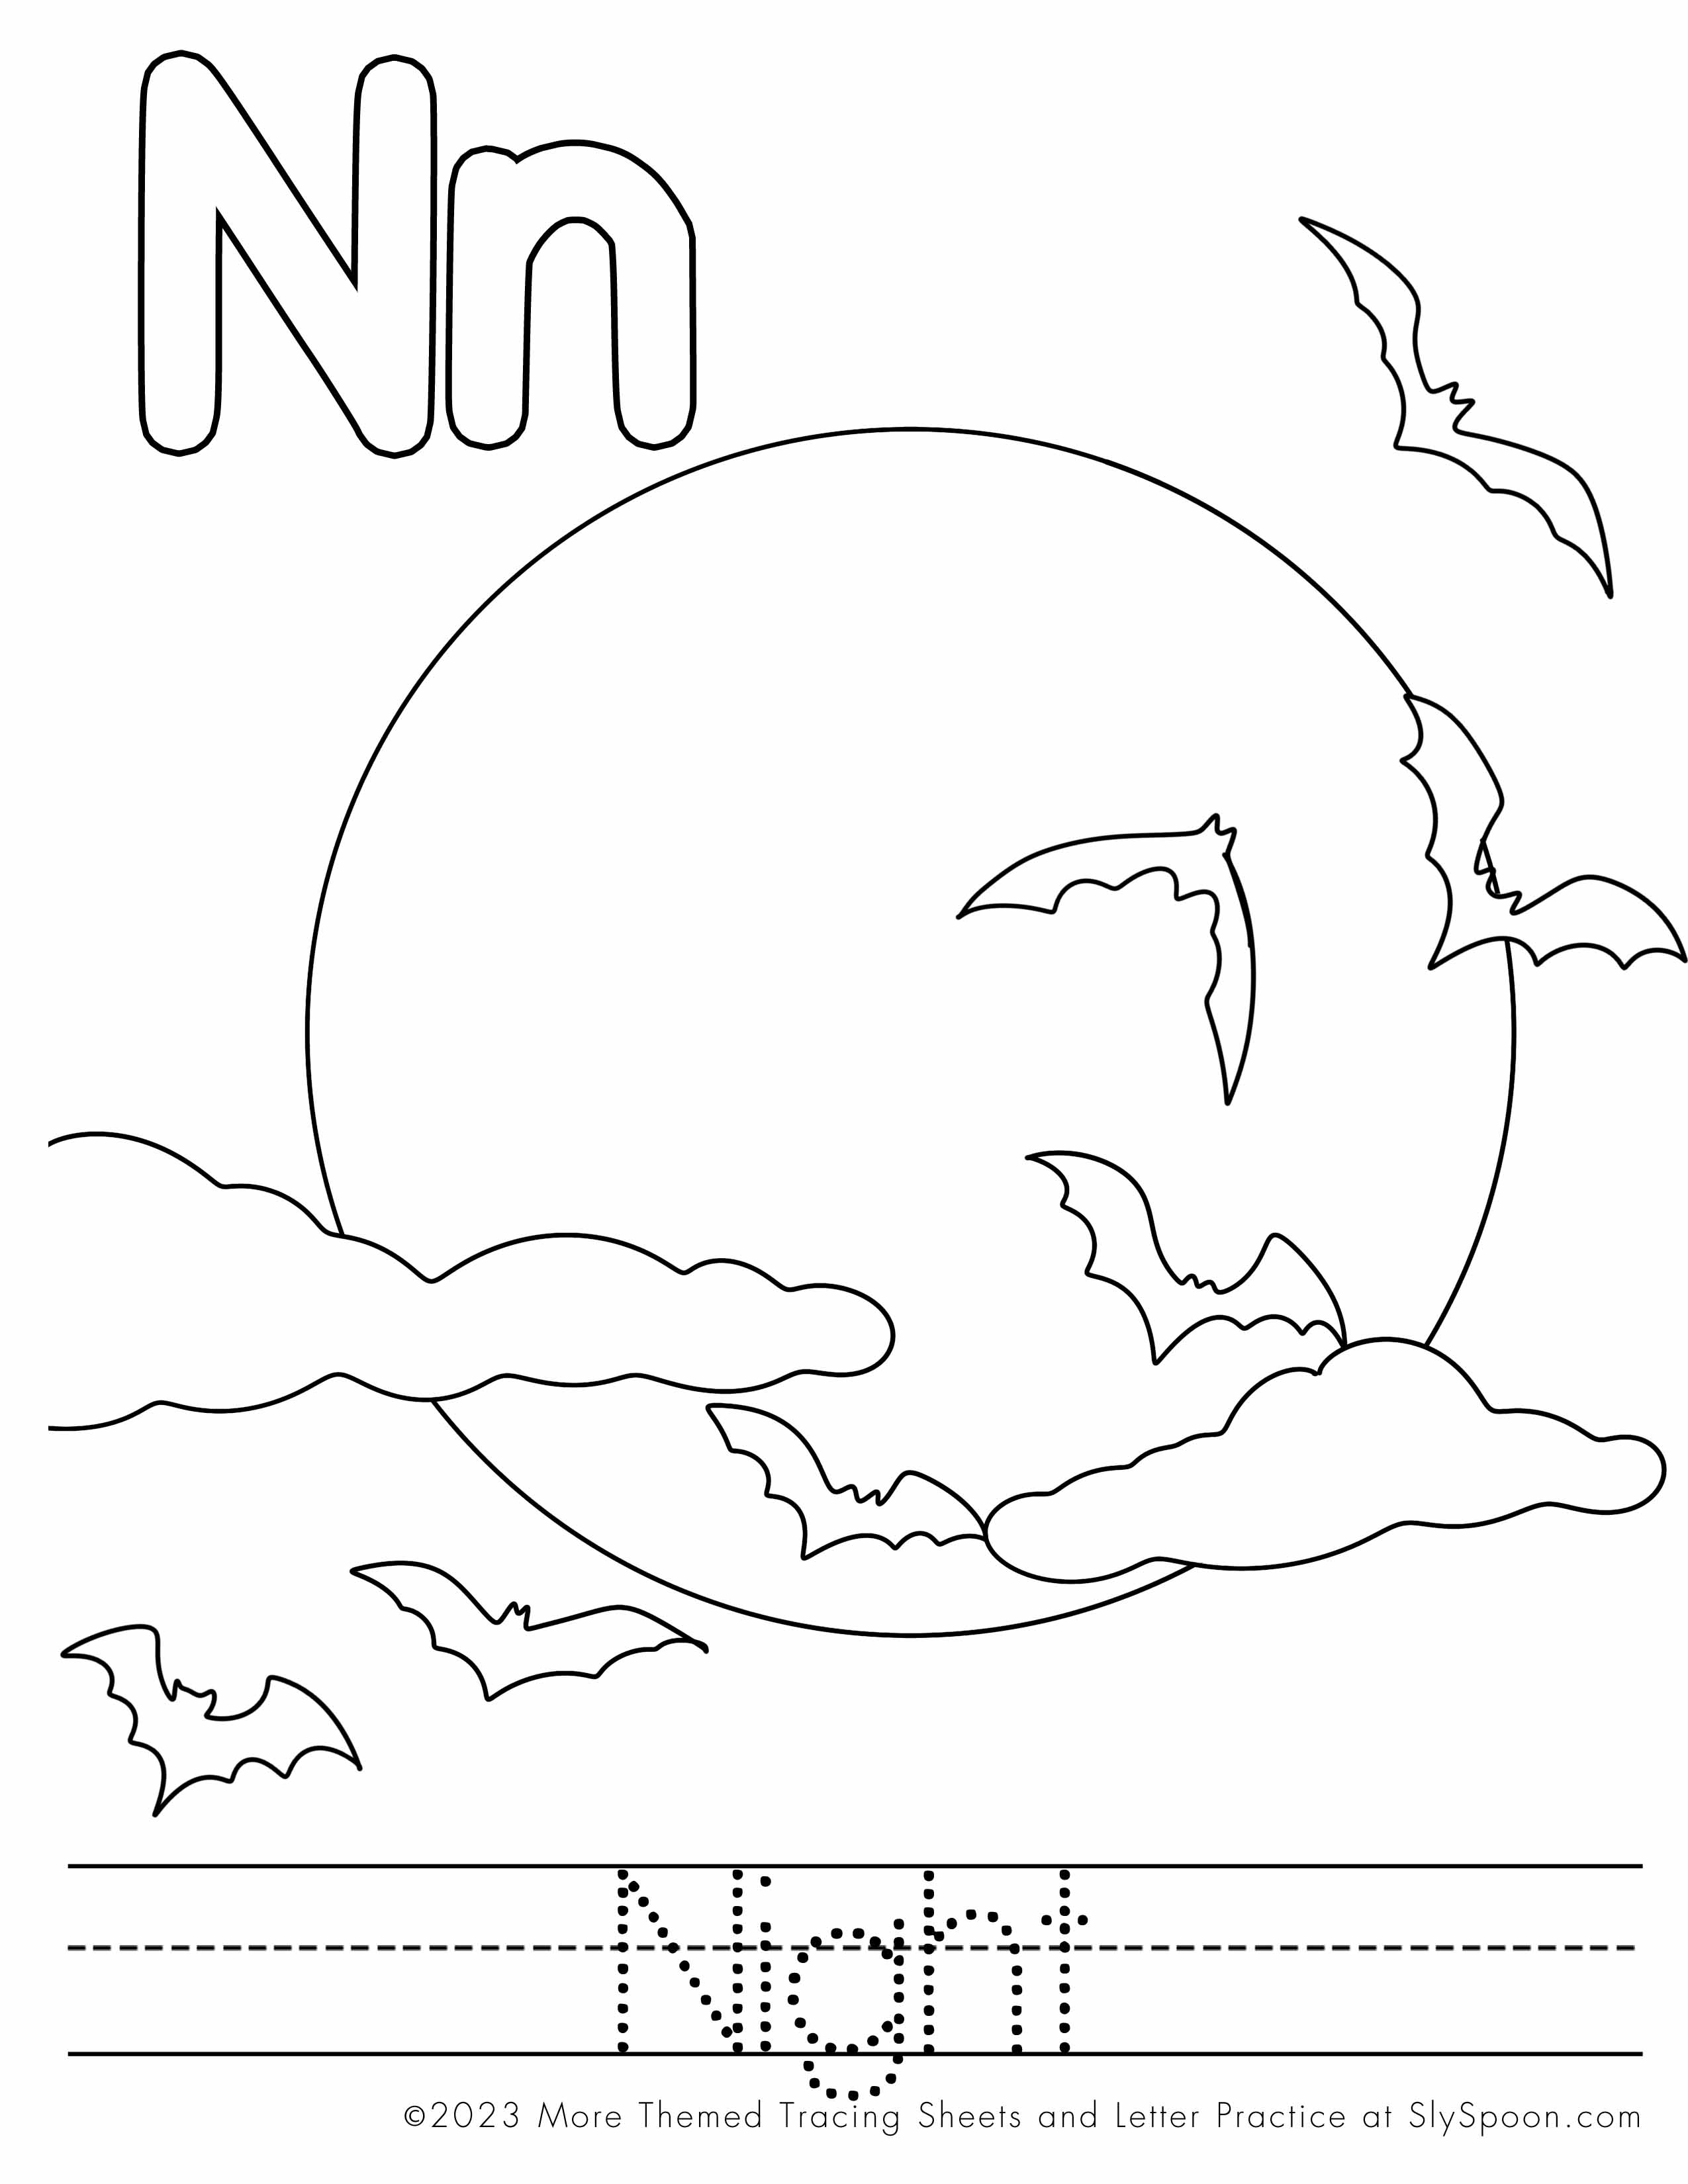 Free printable halloween themed letter n coloring and activity worksheets